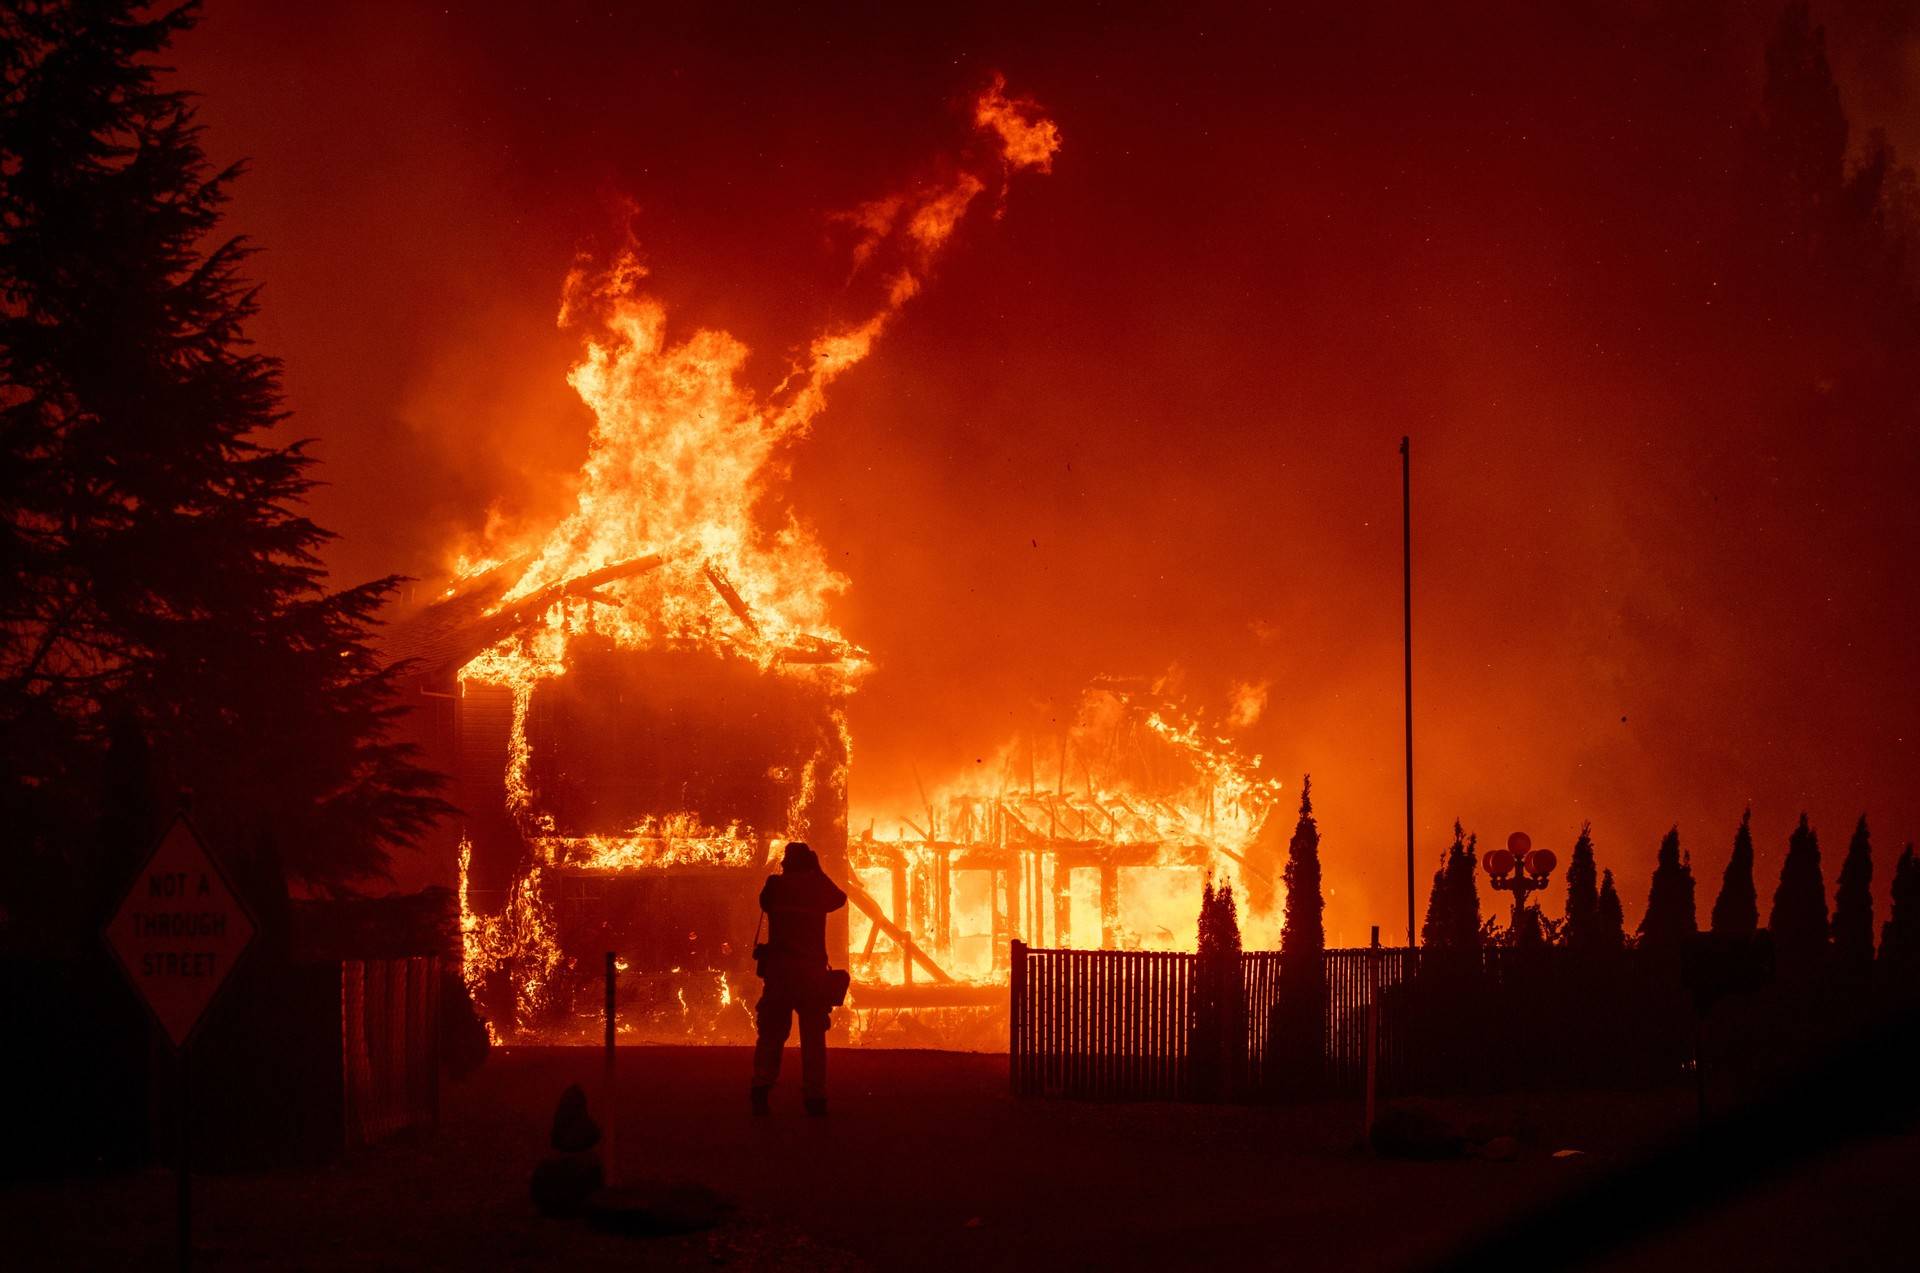 A home burns during the Camp Fire in Paradise, California. JOSH EDELSON/AFP/Getty Images